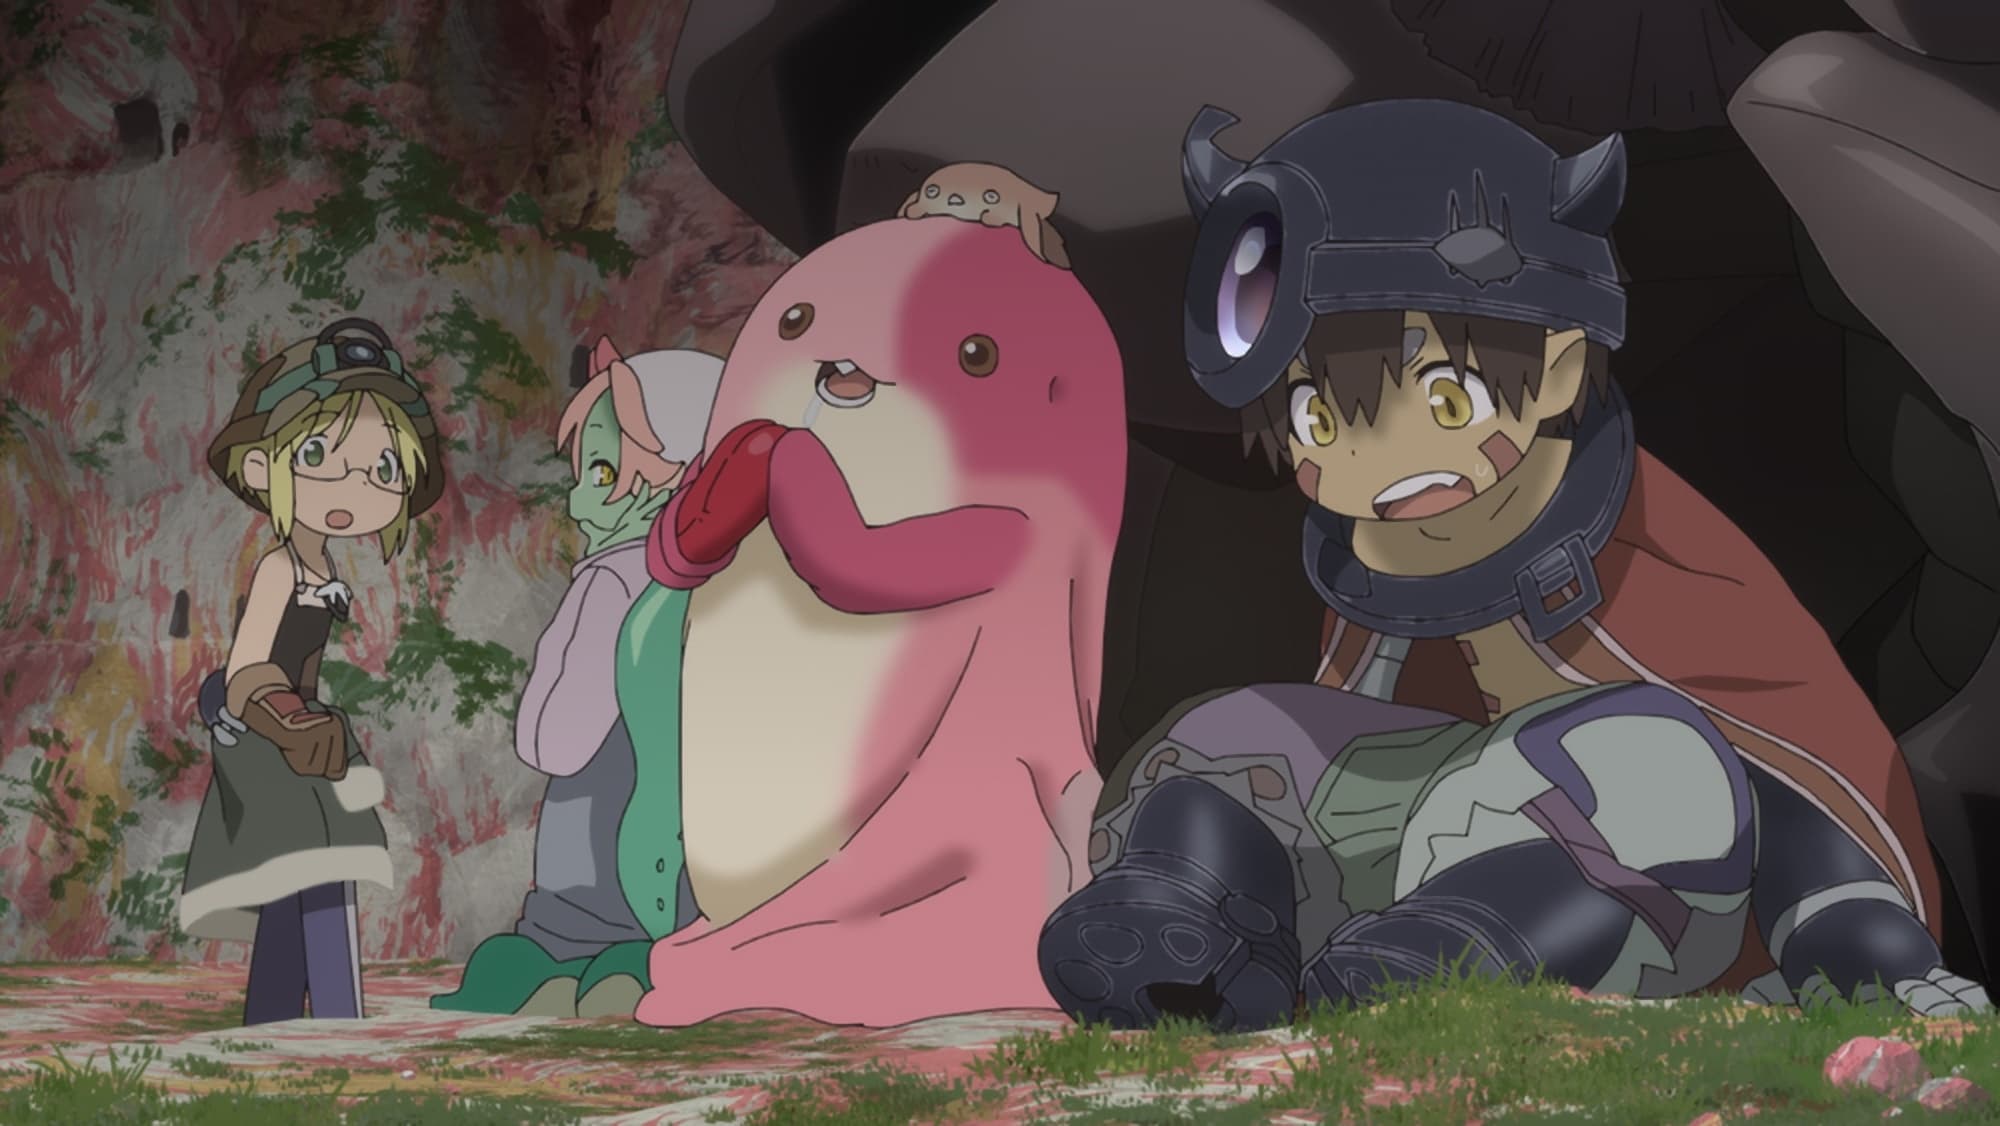 Watch Made in Abyss season 2 episode 1 streaming online